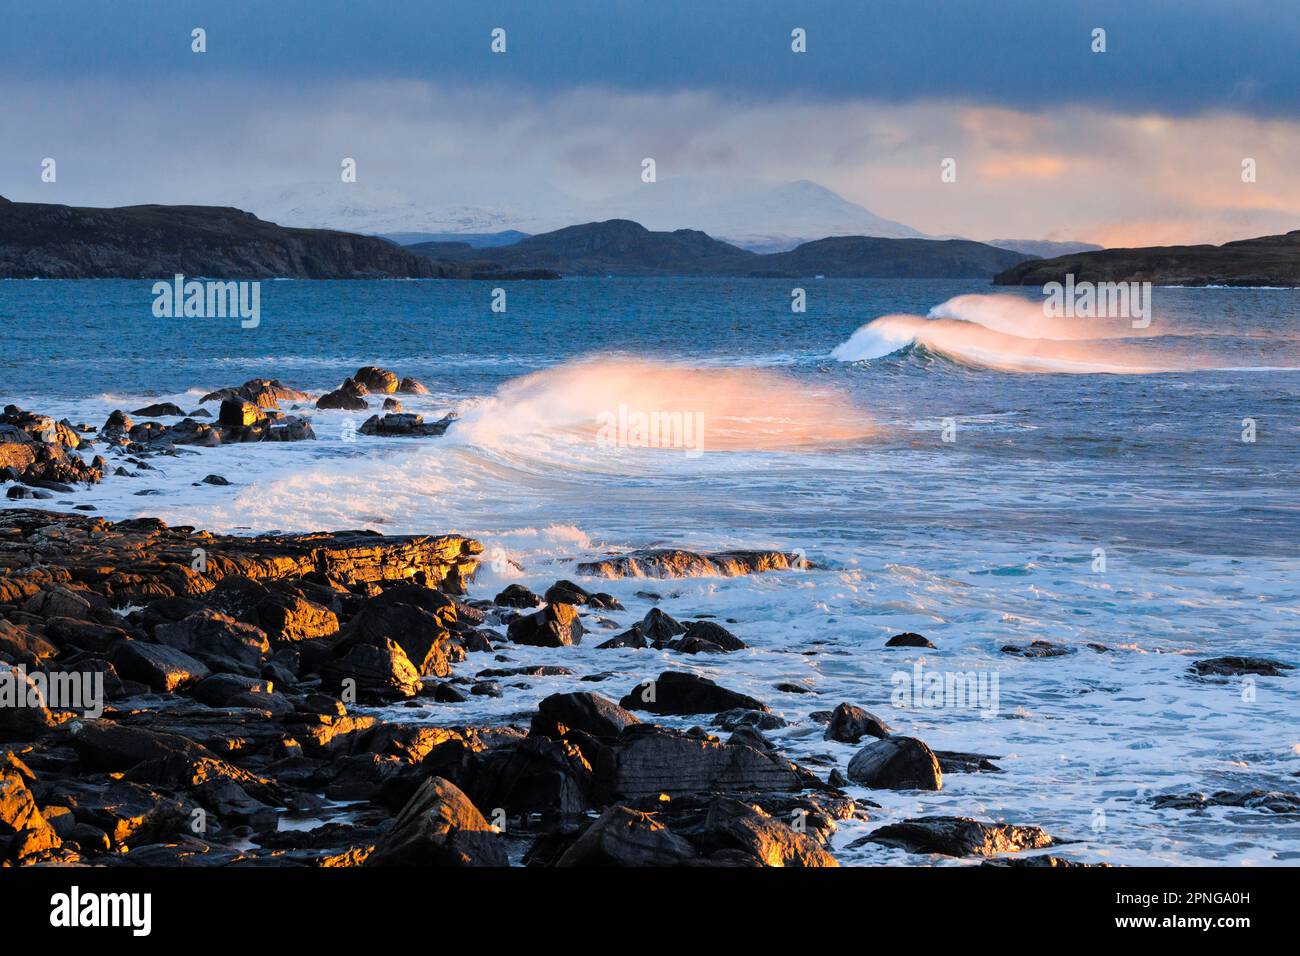 Large waves crash in a winter storm and the swirling spray is illuminated by the warm light of the evening sun, Summer Isles in the background, at Stock Photo